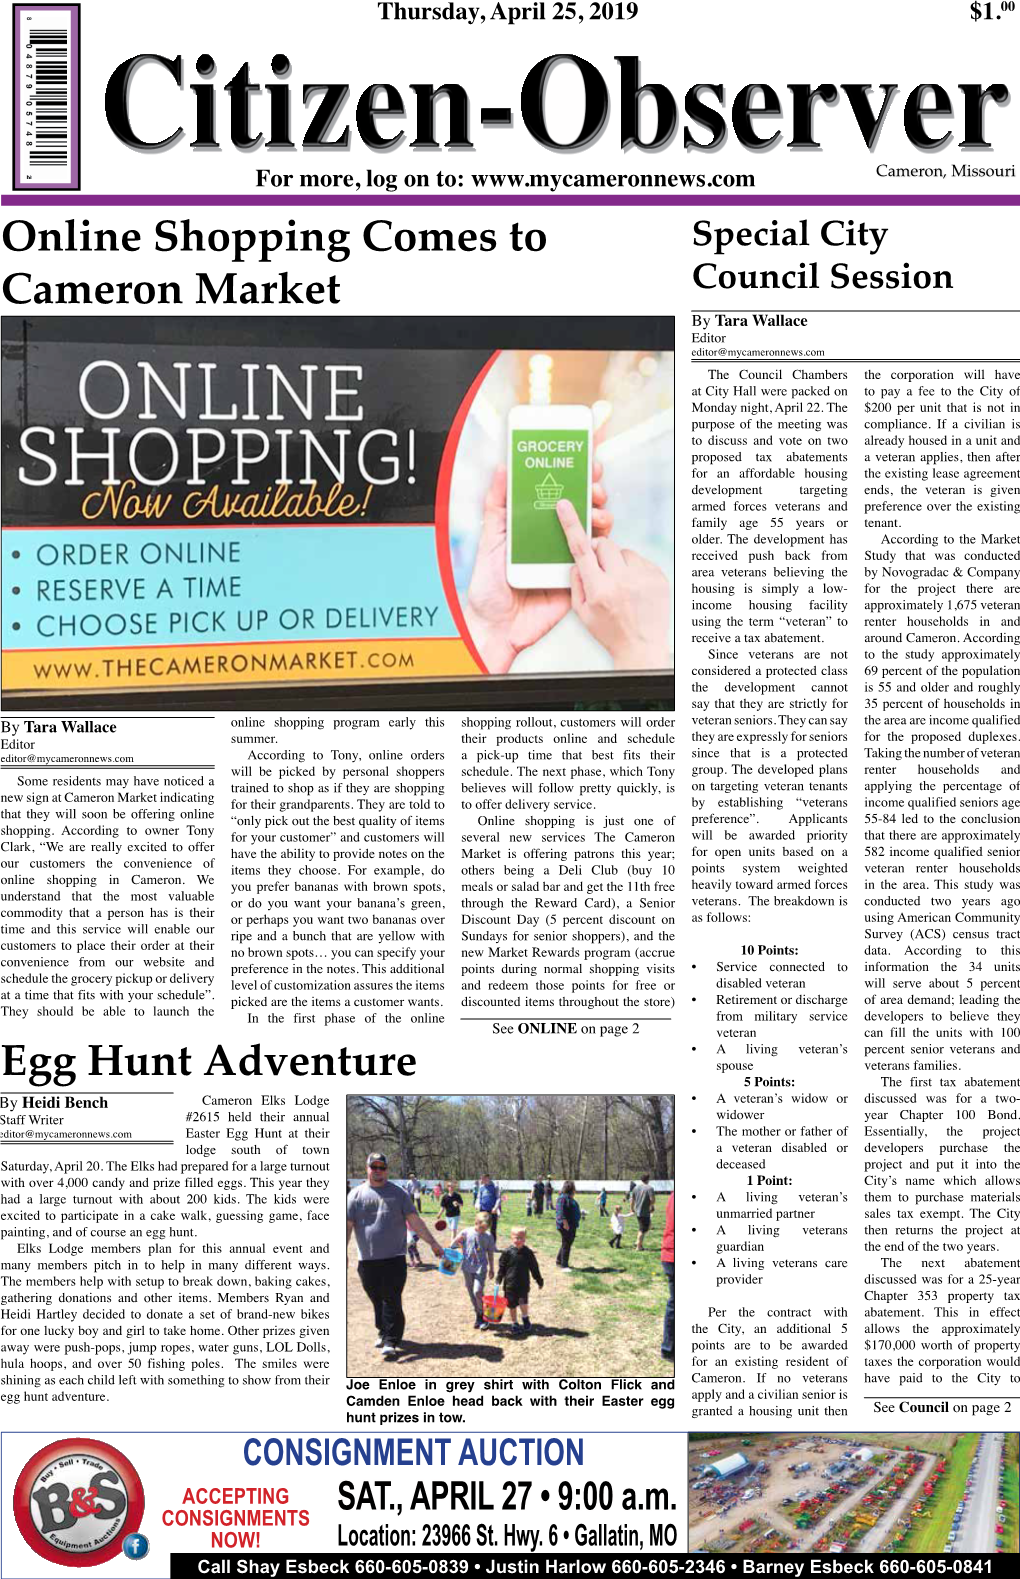 Online Shopping Comes to Cameron Market Egg Hunt Adventure